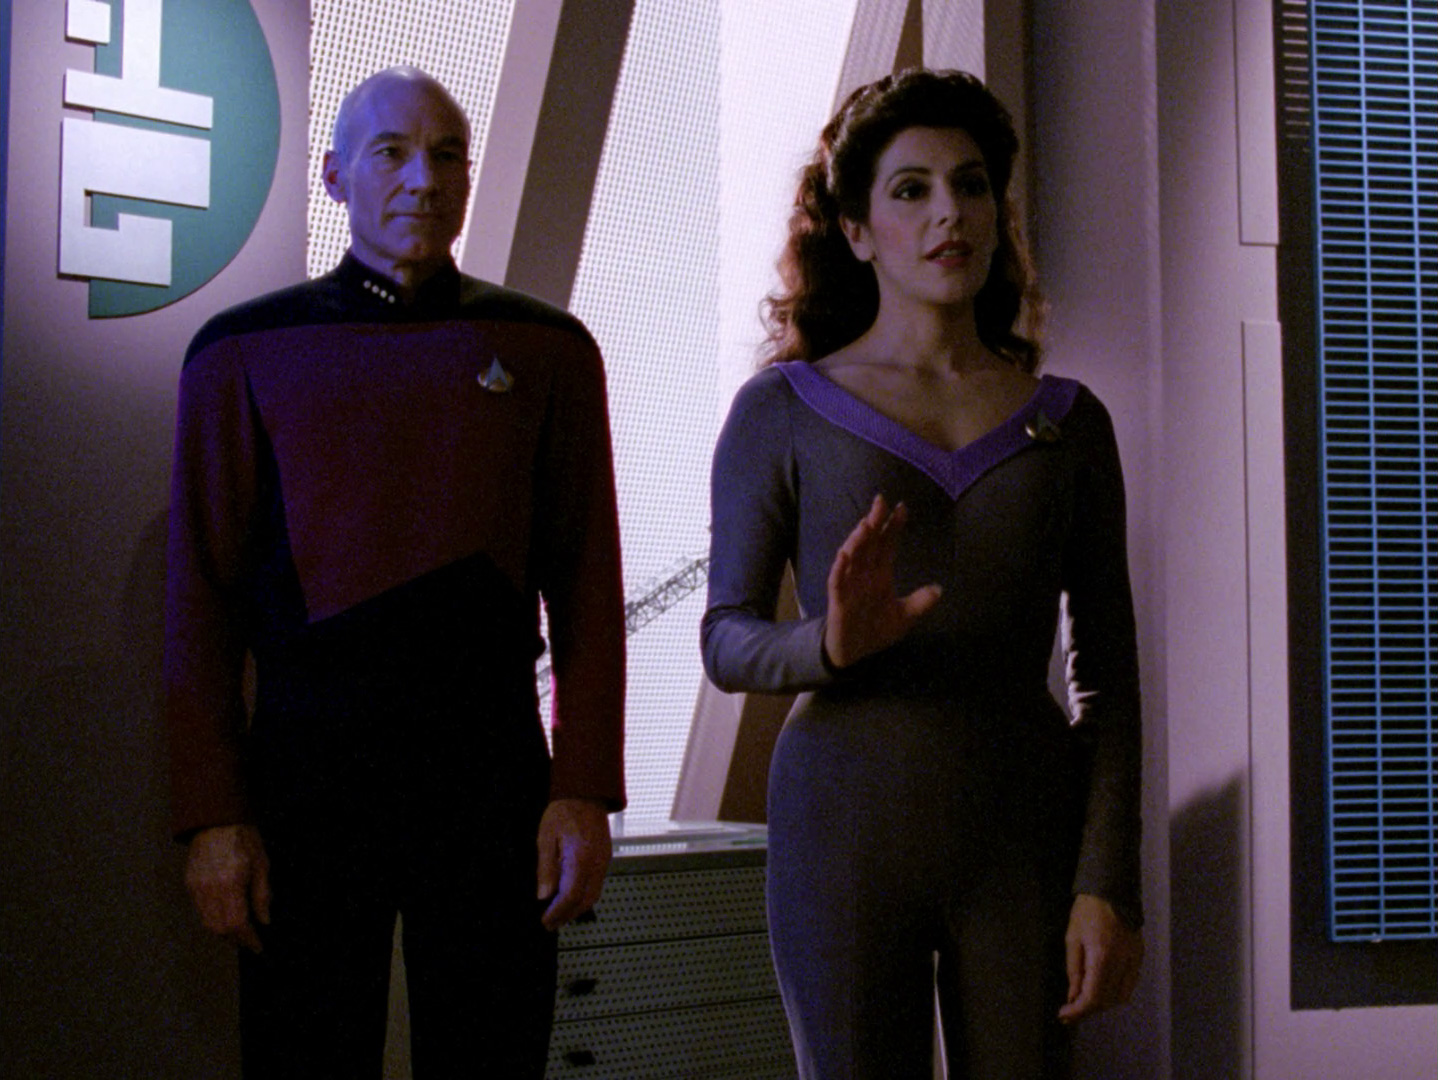 Picard_and_Troi_make_first_contact.jpg